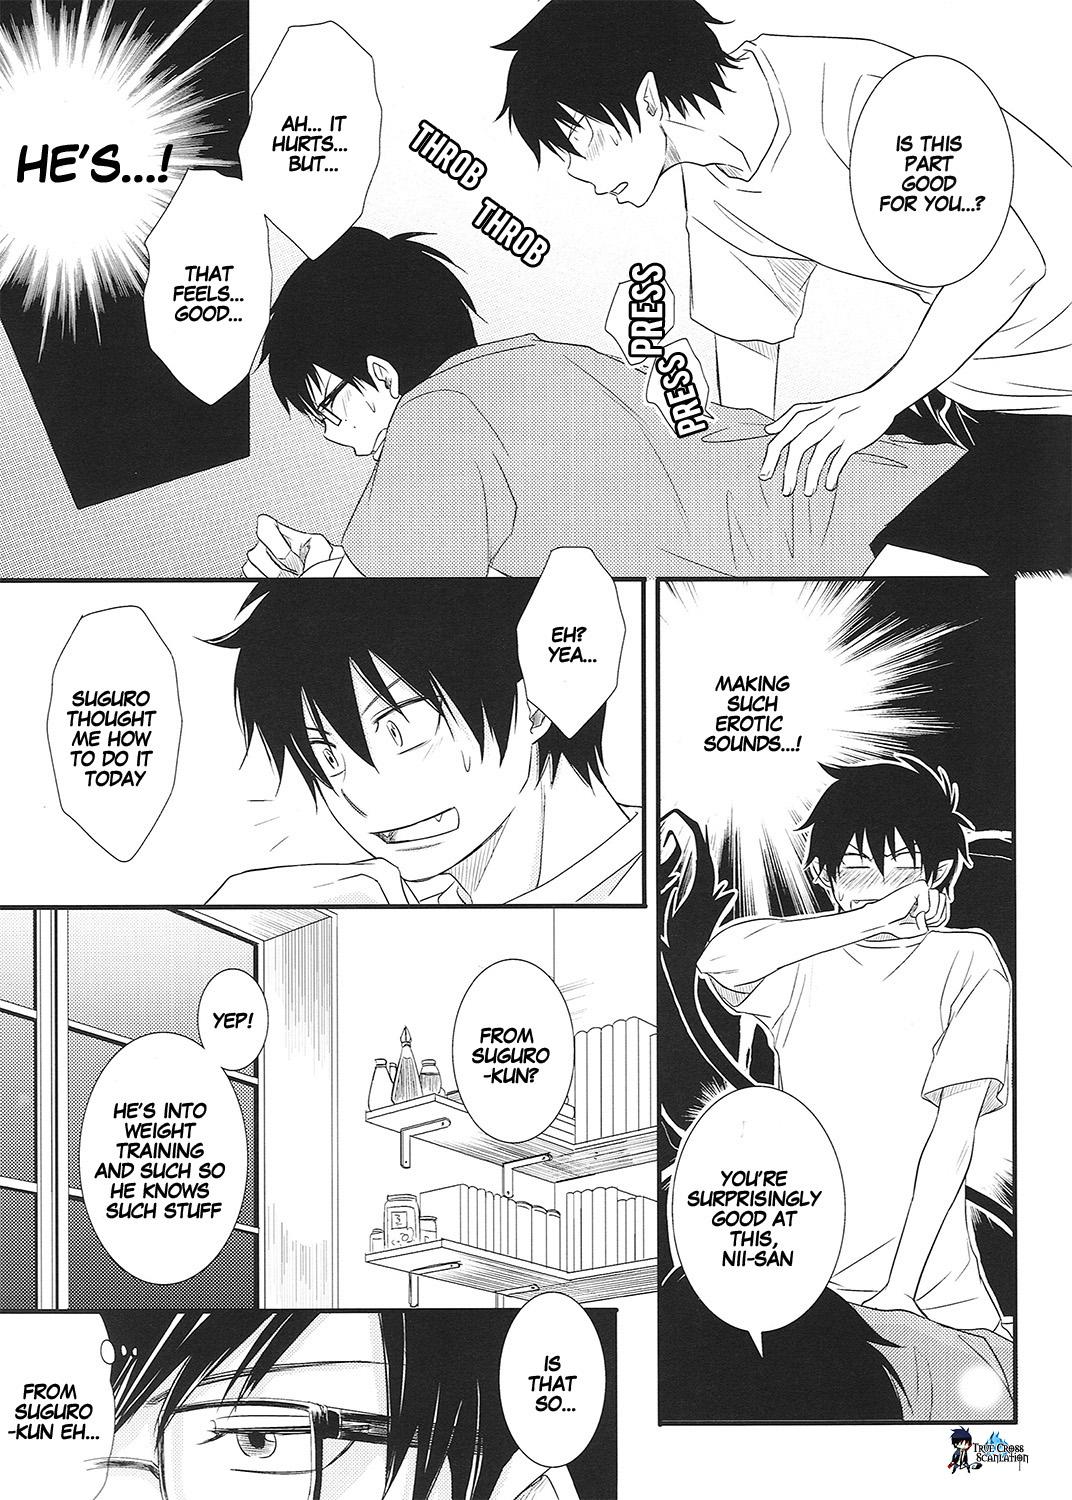 Student No Brother, No Life - Ao no exorcist Muscles - Page 11